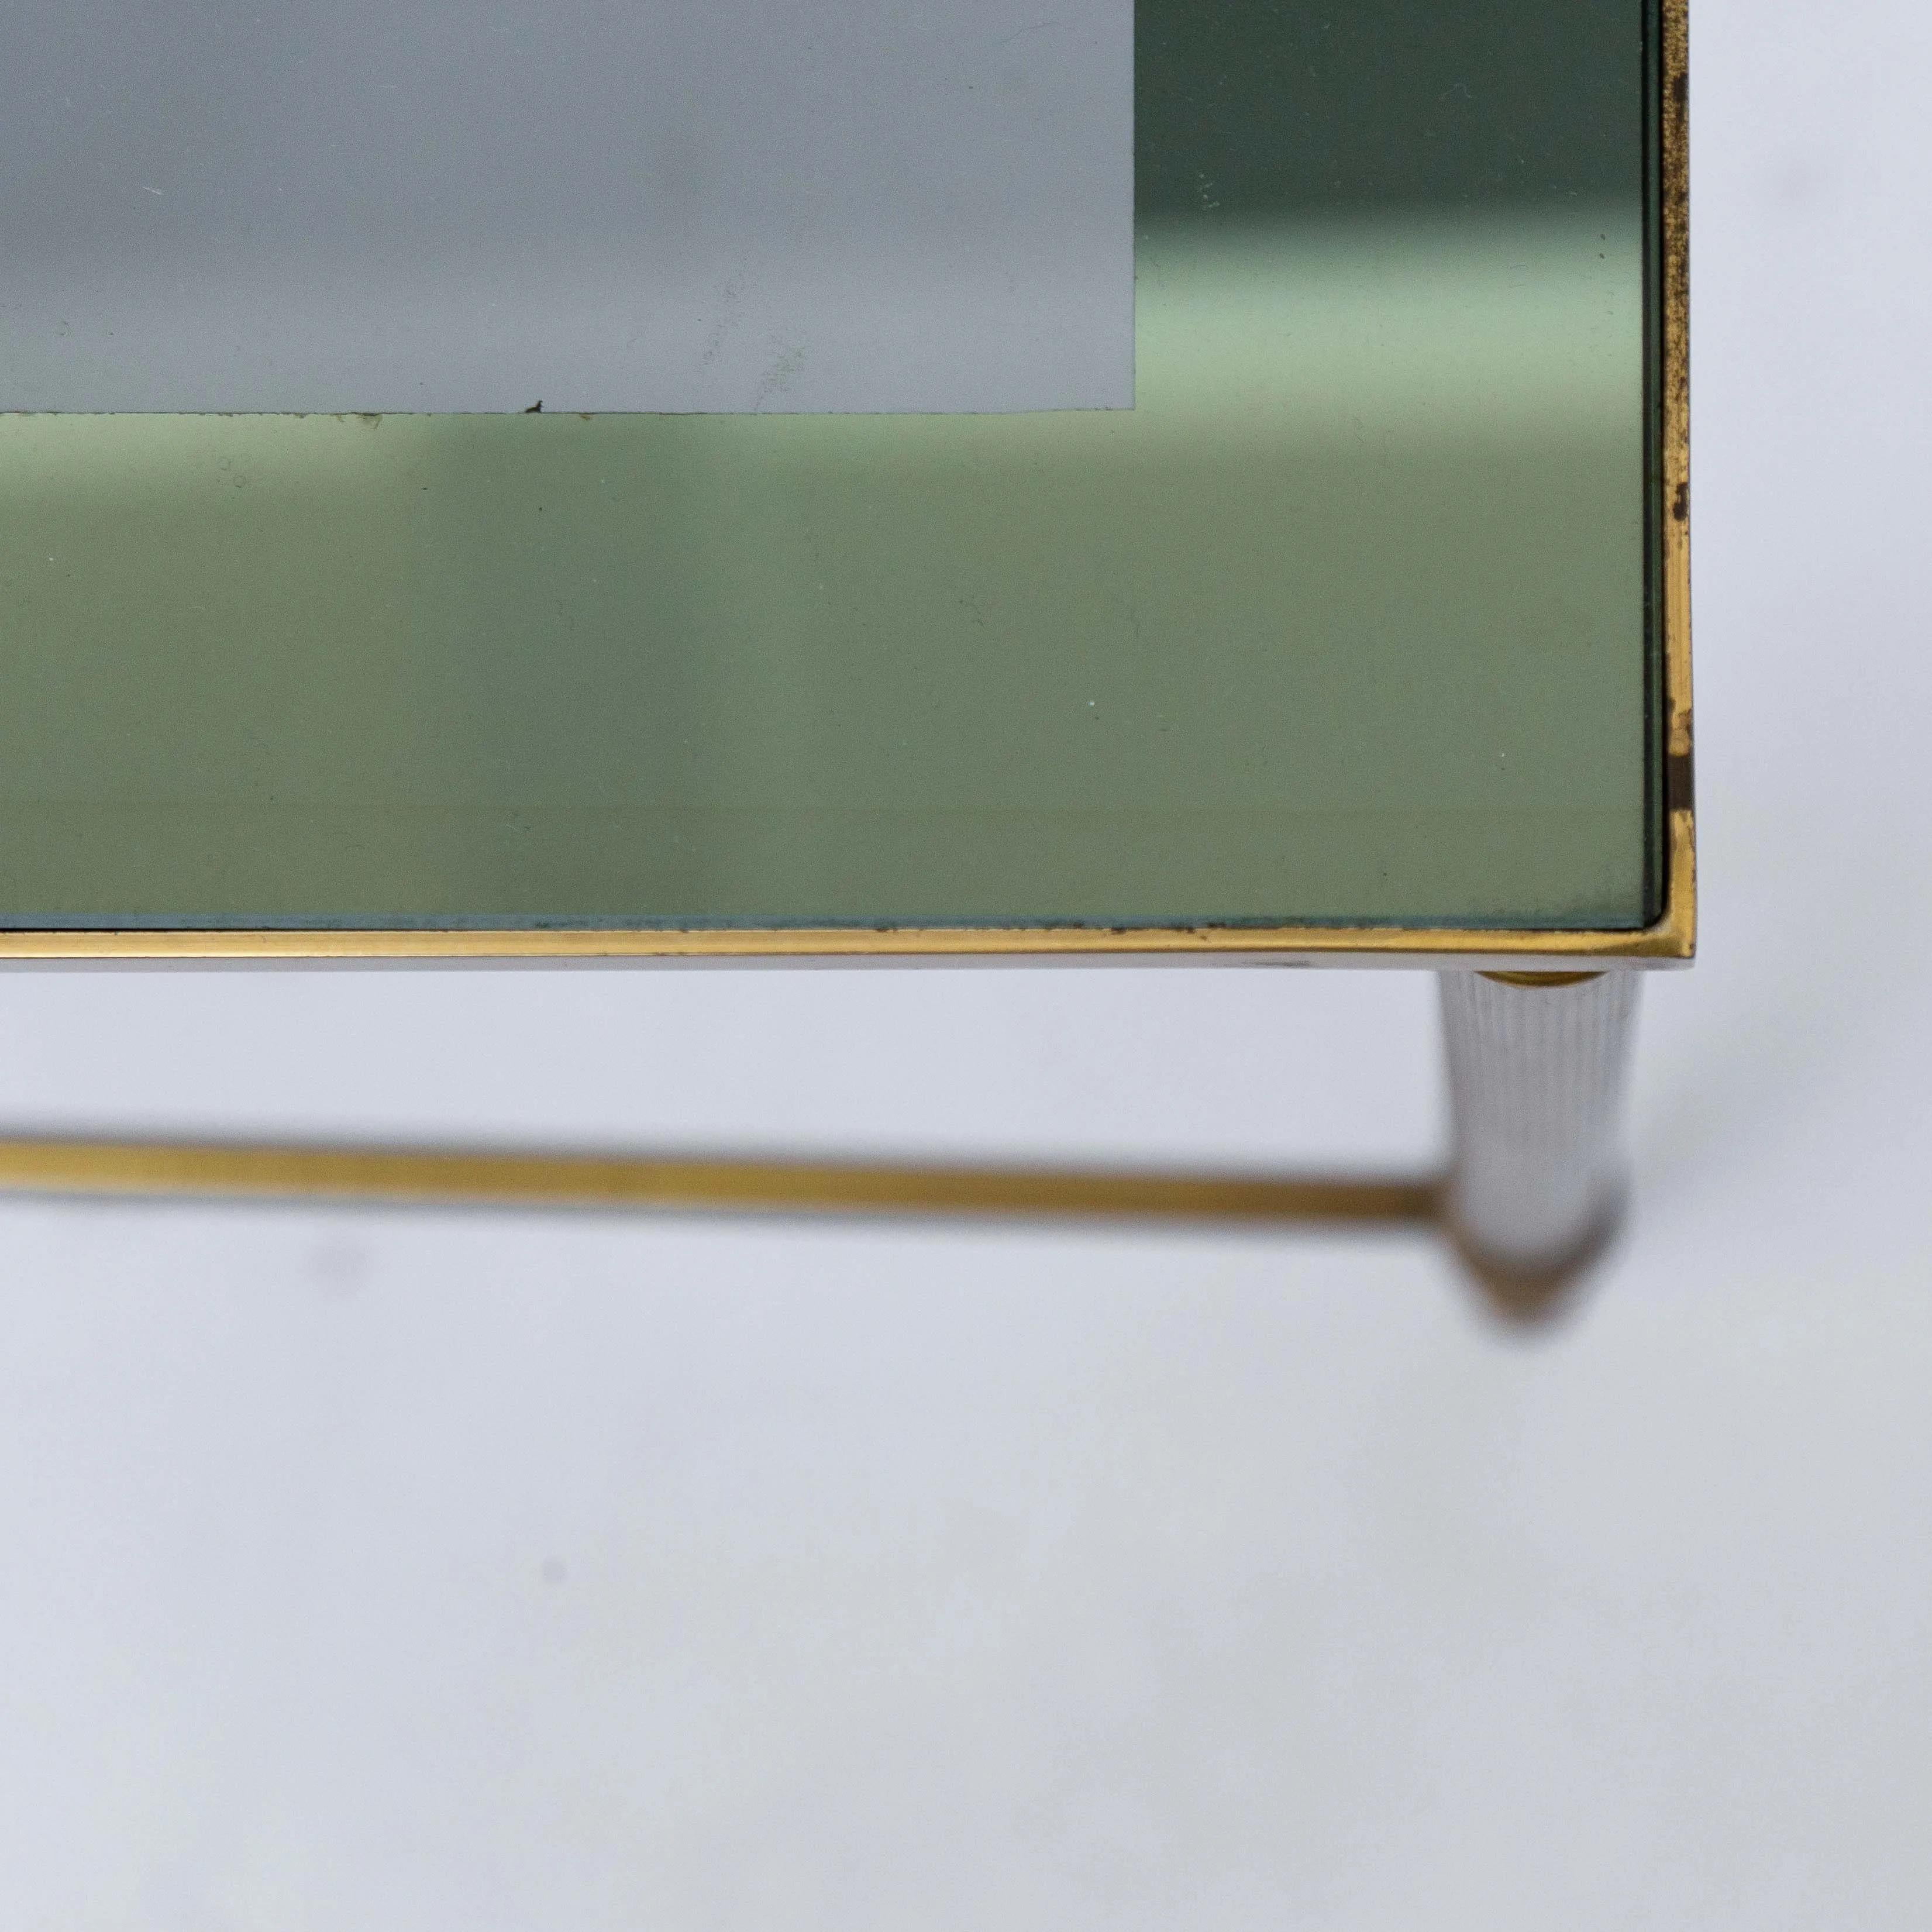 The mirrored glass tabletop makes these tables chique and elegant. Typical for the Mid-Century Modern Hollywood Regency style. Both the brass frames and the mirrored glass top show a very elegant patine!

no.1: 38 x 36 x 33
no.2: 40 x 42 x